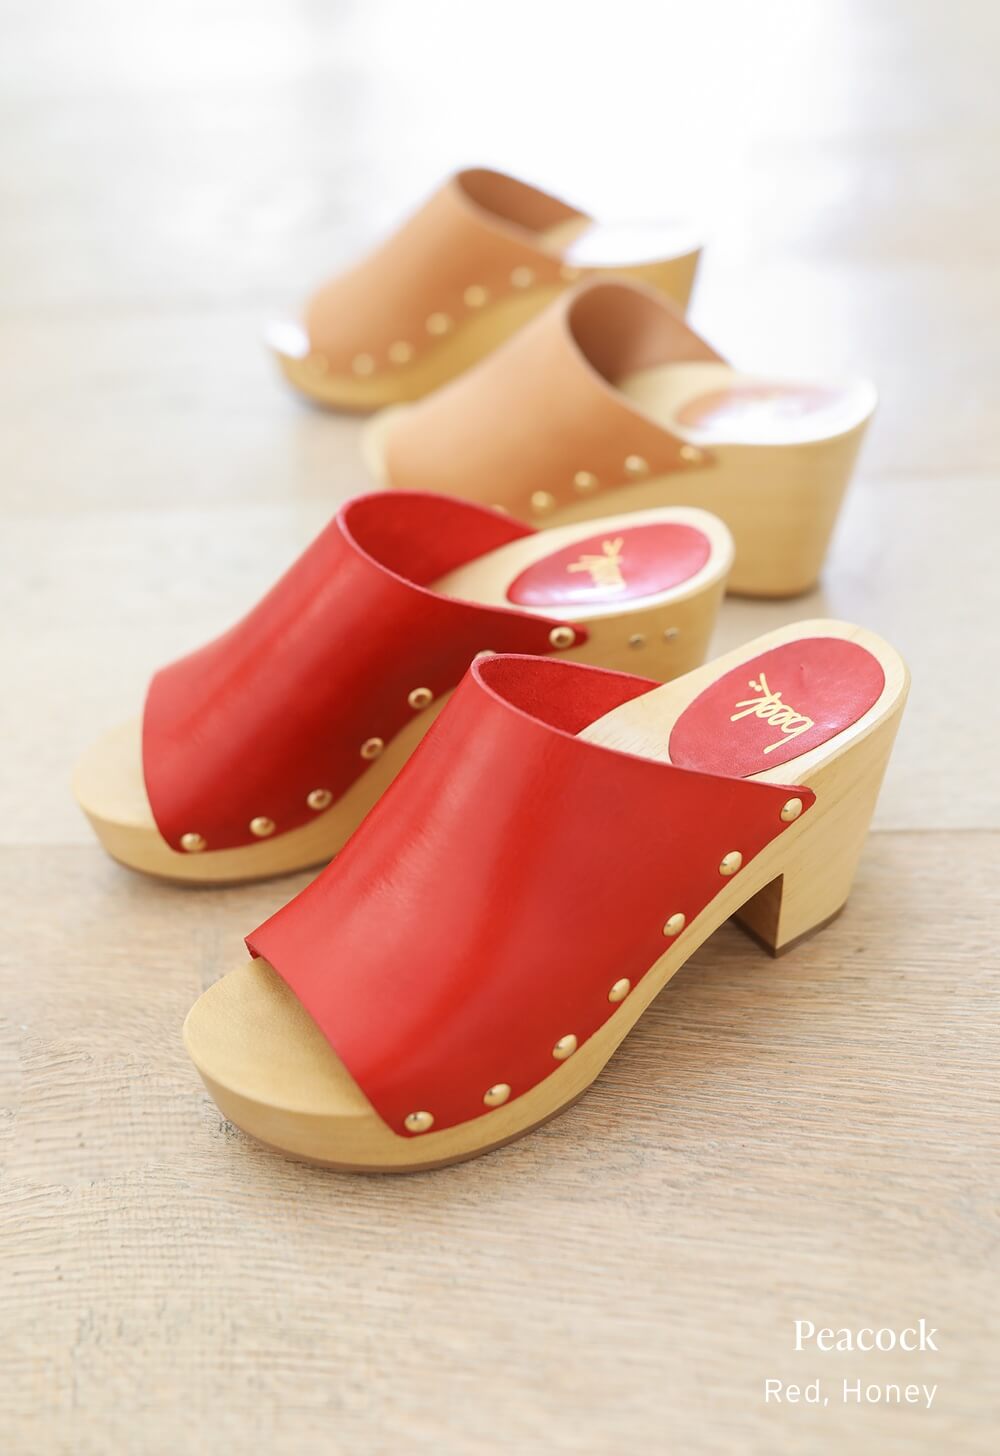 Group shot of Peacock clogs in red and honey